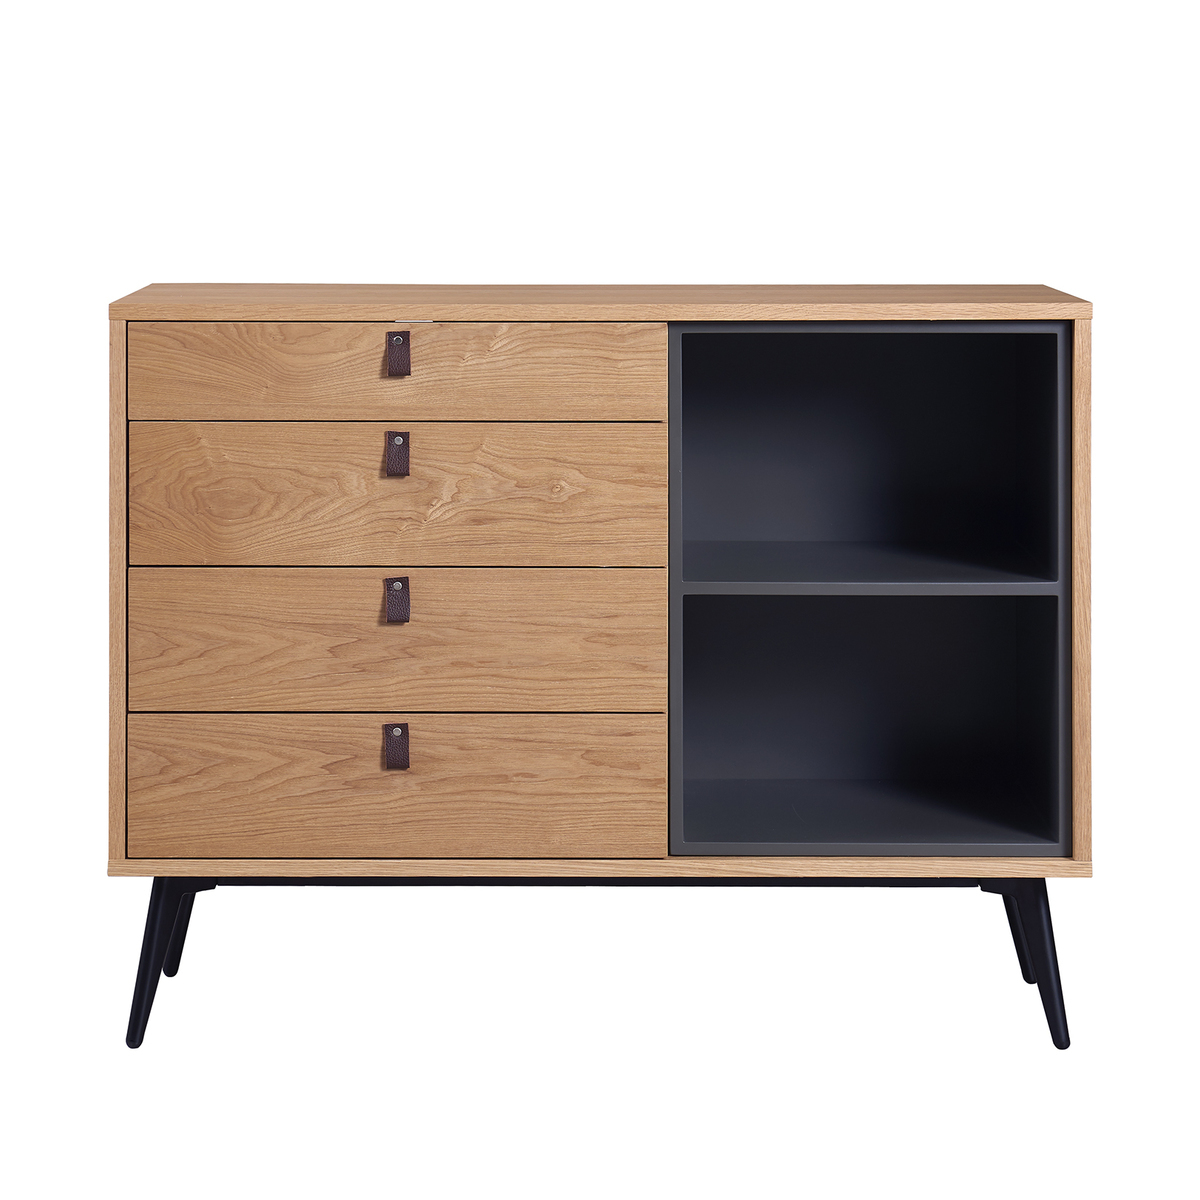 43“ASH with Warm Grey COLOR One Door with Three Drawers Sideboard